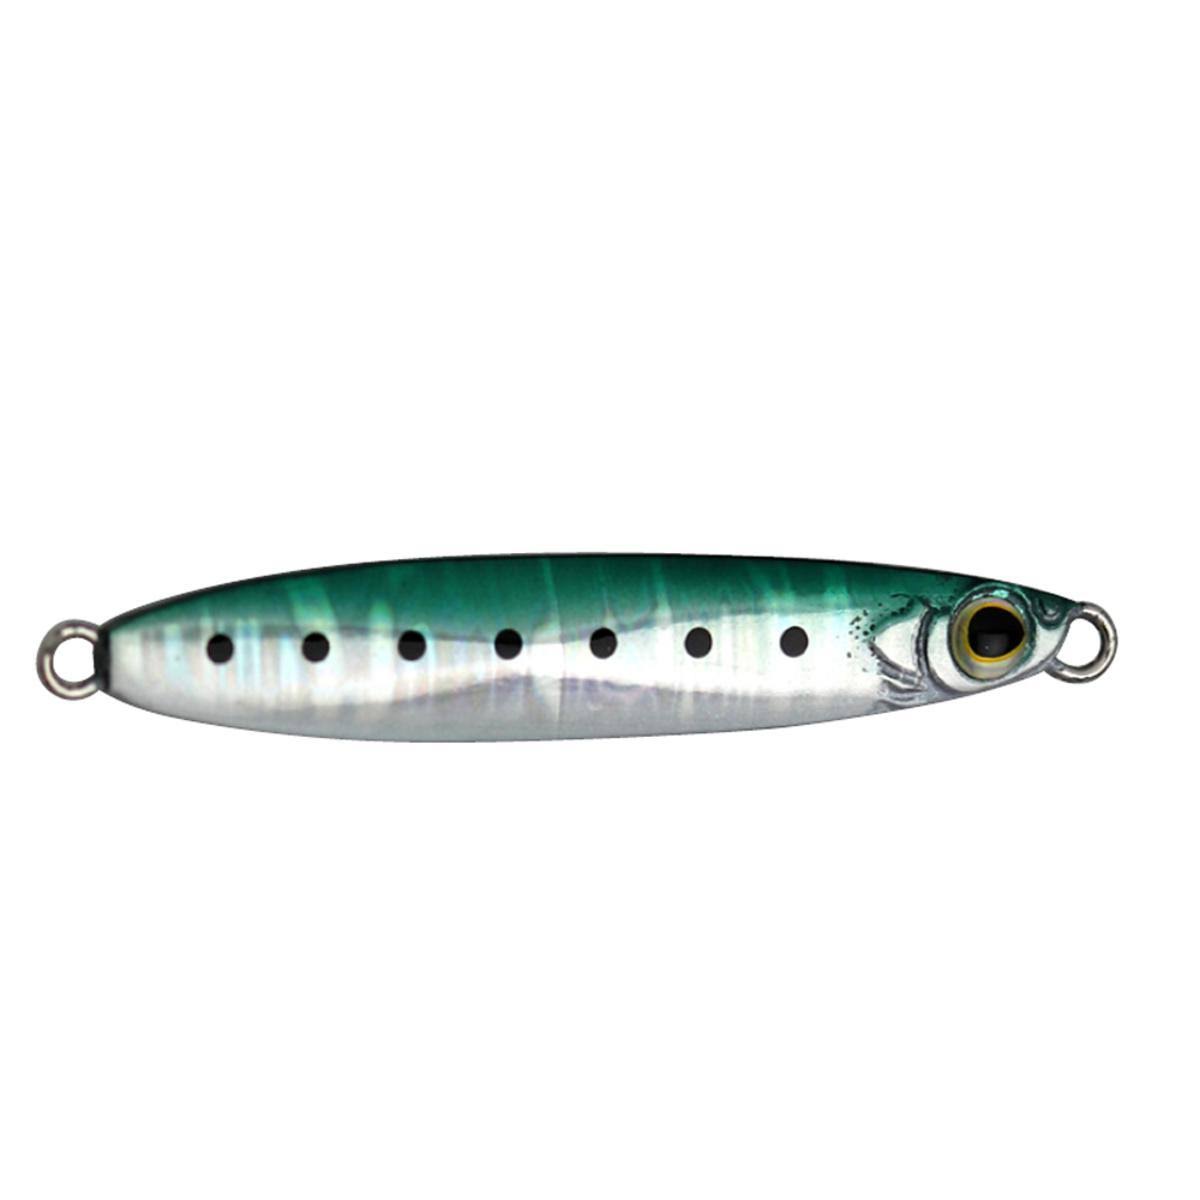 Shimano Coltsniper Jig Slow Fall Lure | Boating & Fishing | Delivery guaranteed | 30 Day Money Back Guarantee | Free Shipping On All Orders